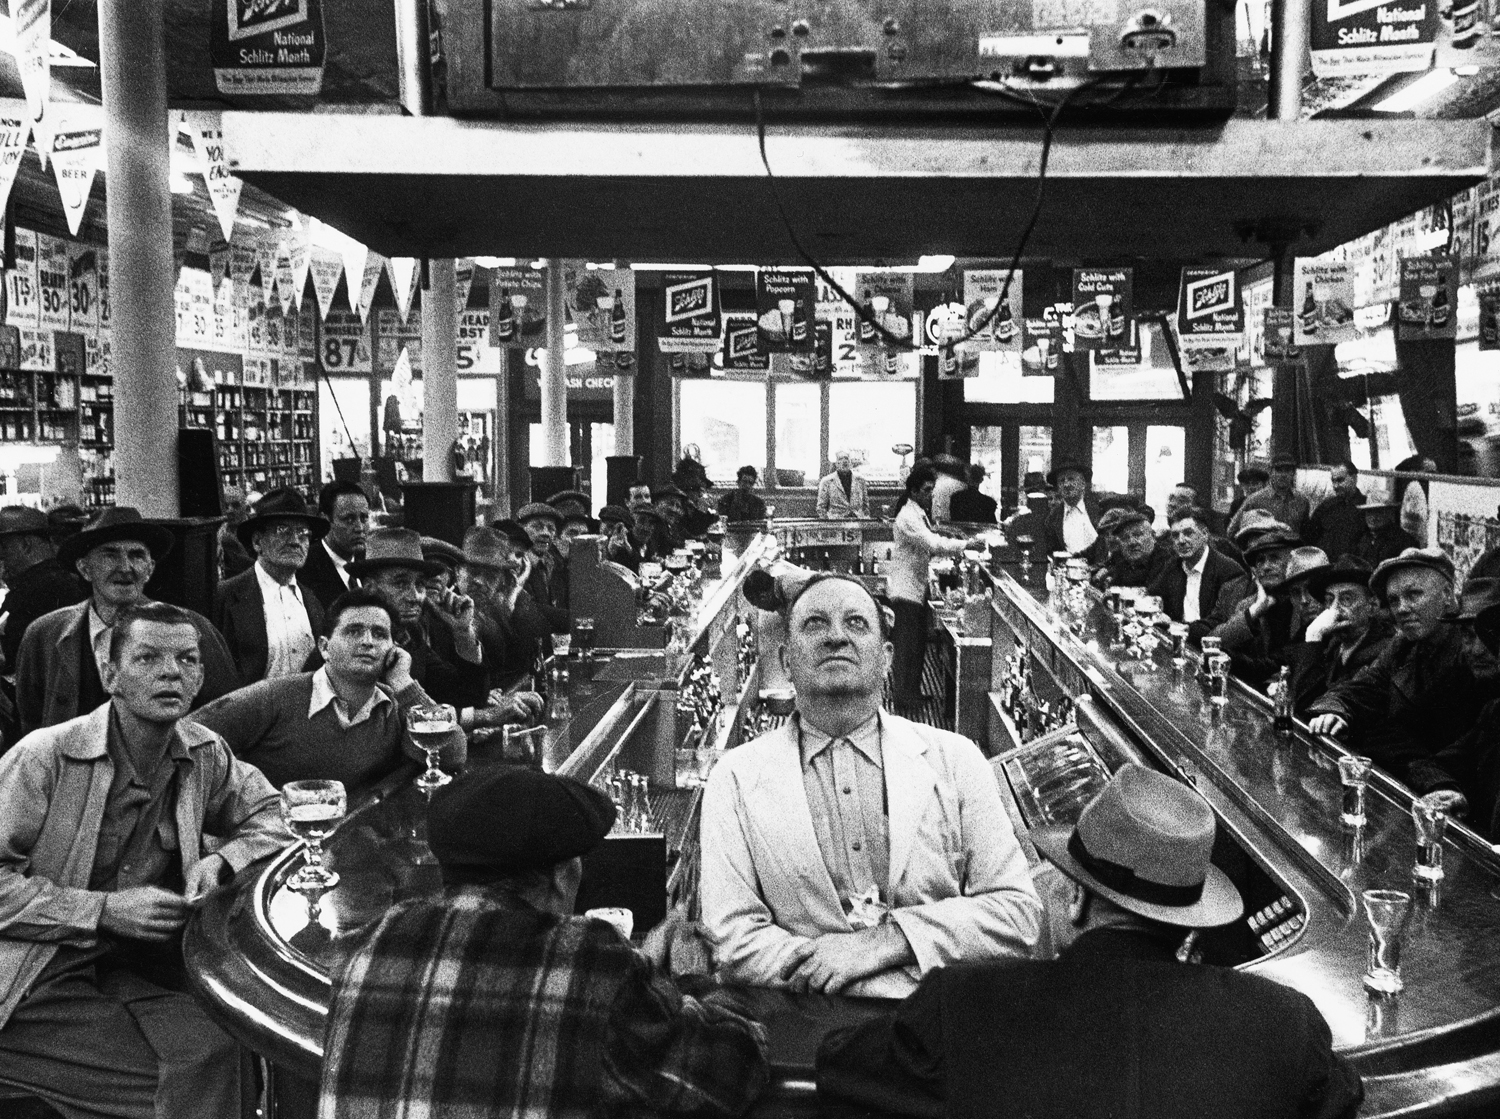 A rapt audience in a Chicago bar watches the 1952 Subway Series between the Yankees and Dodgers in 1952.